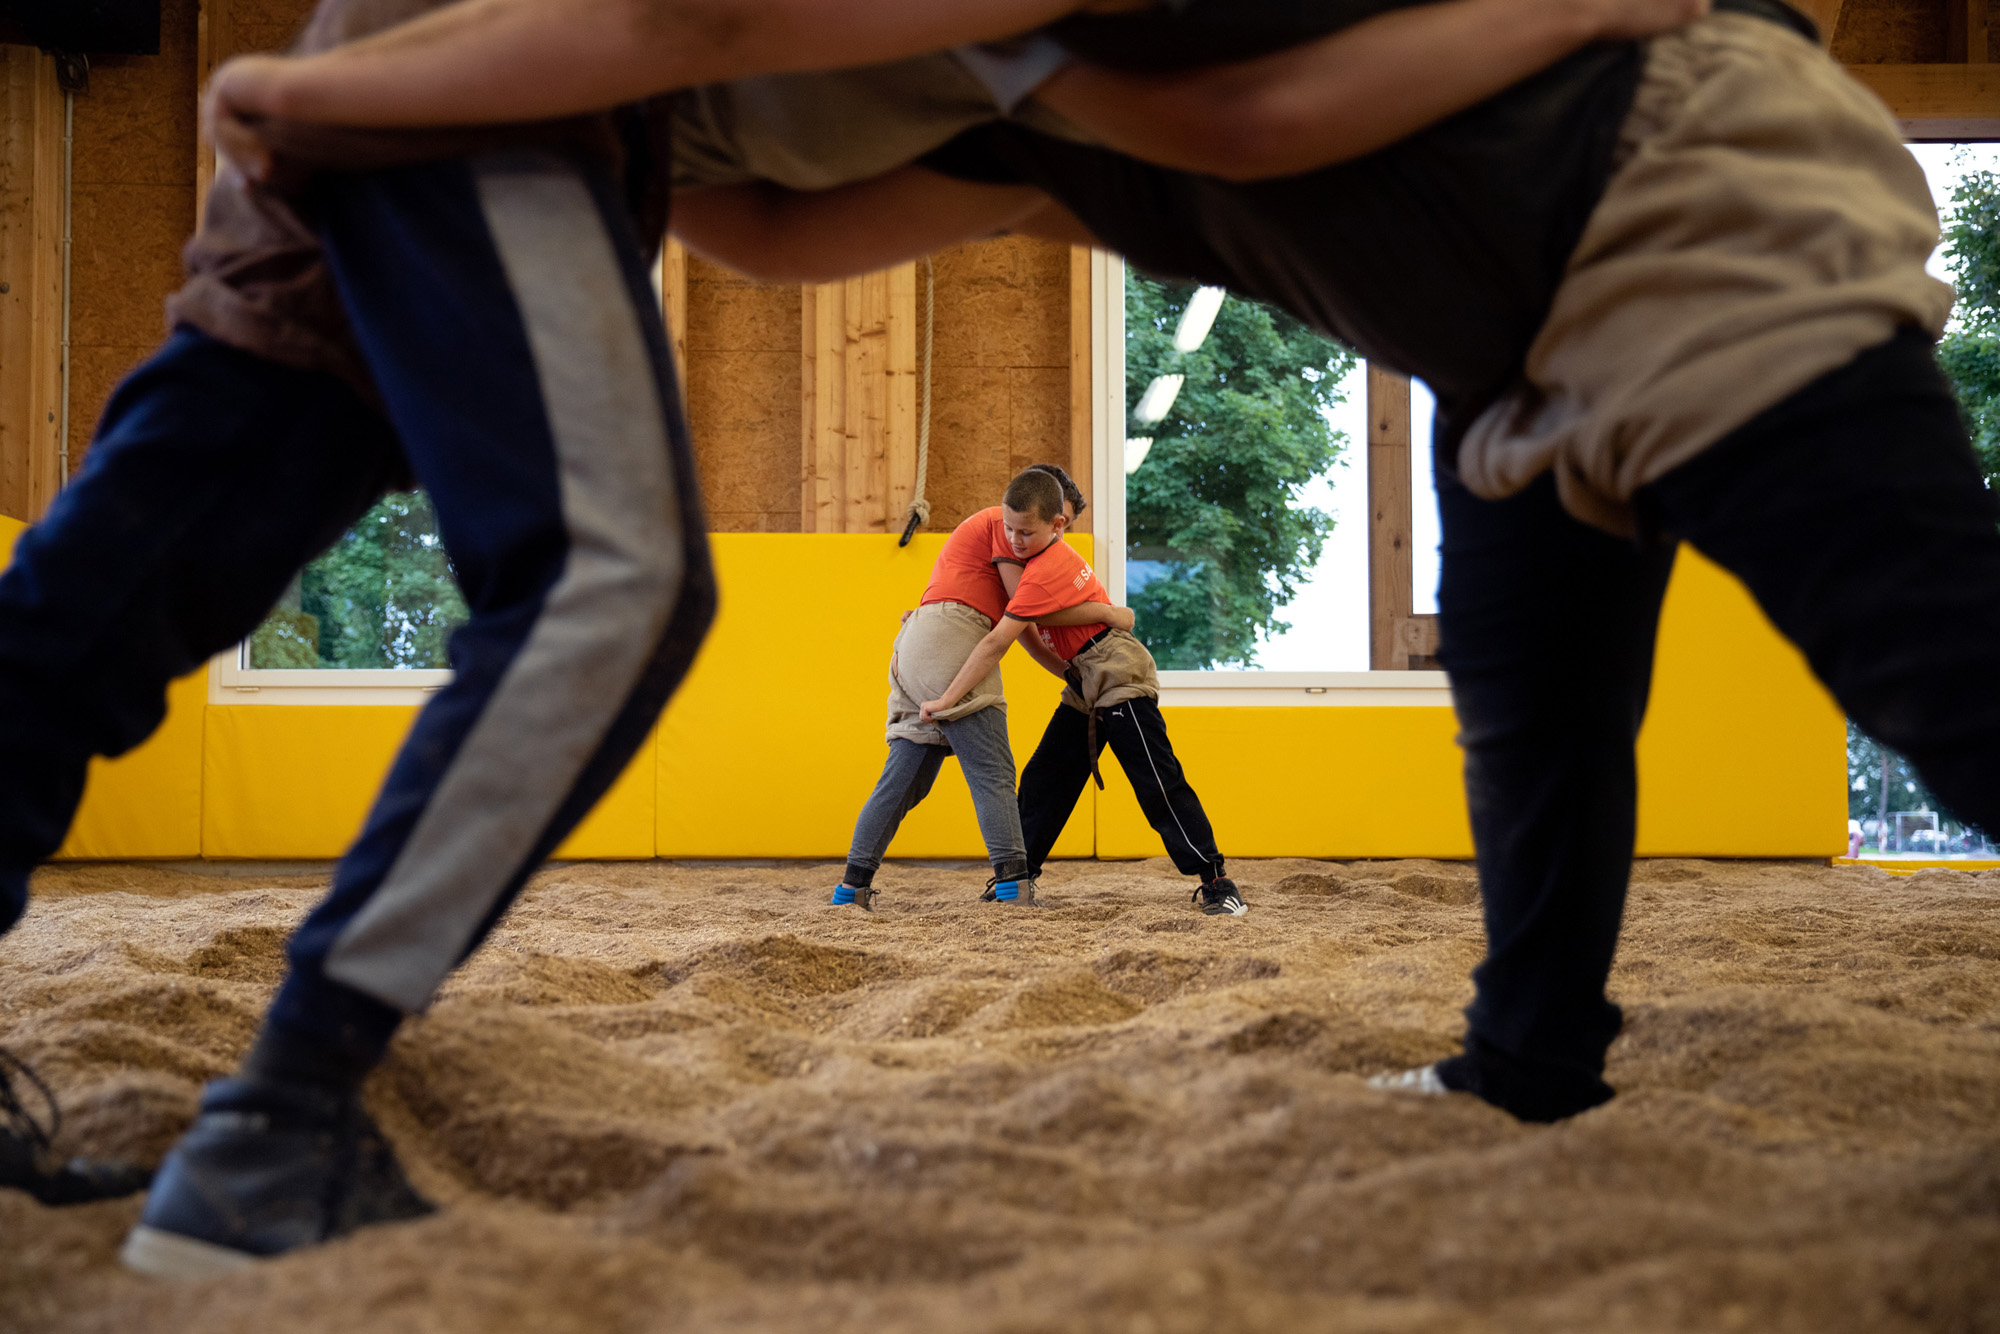 Ohio University photography student Leslie Ostronic photographed traditional Swiss Wrestling during the Visual Discovery Conference in Lucerne Switzerland.